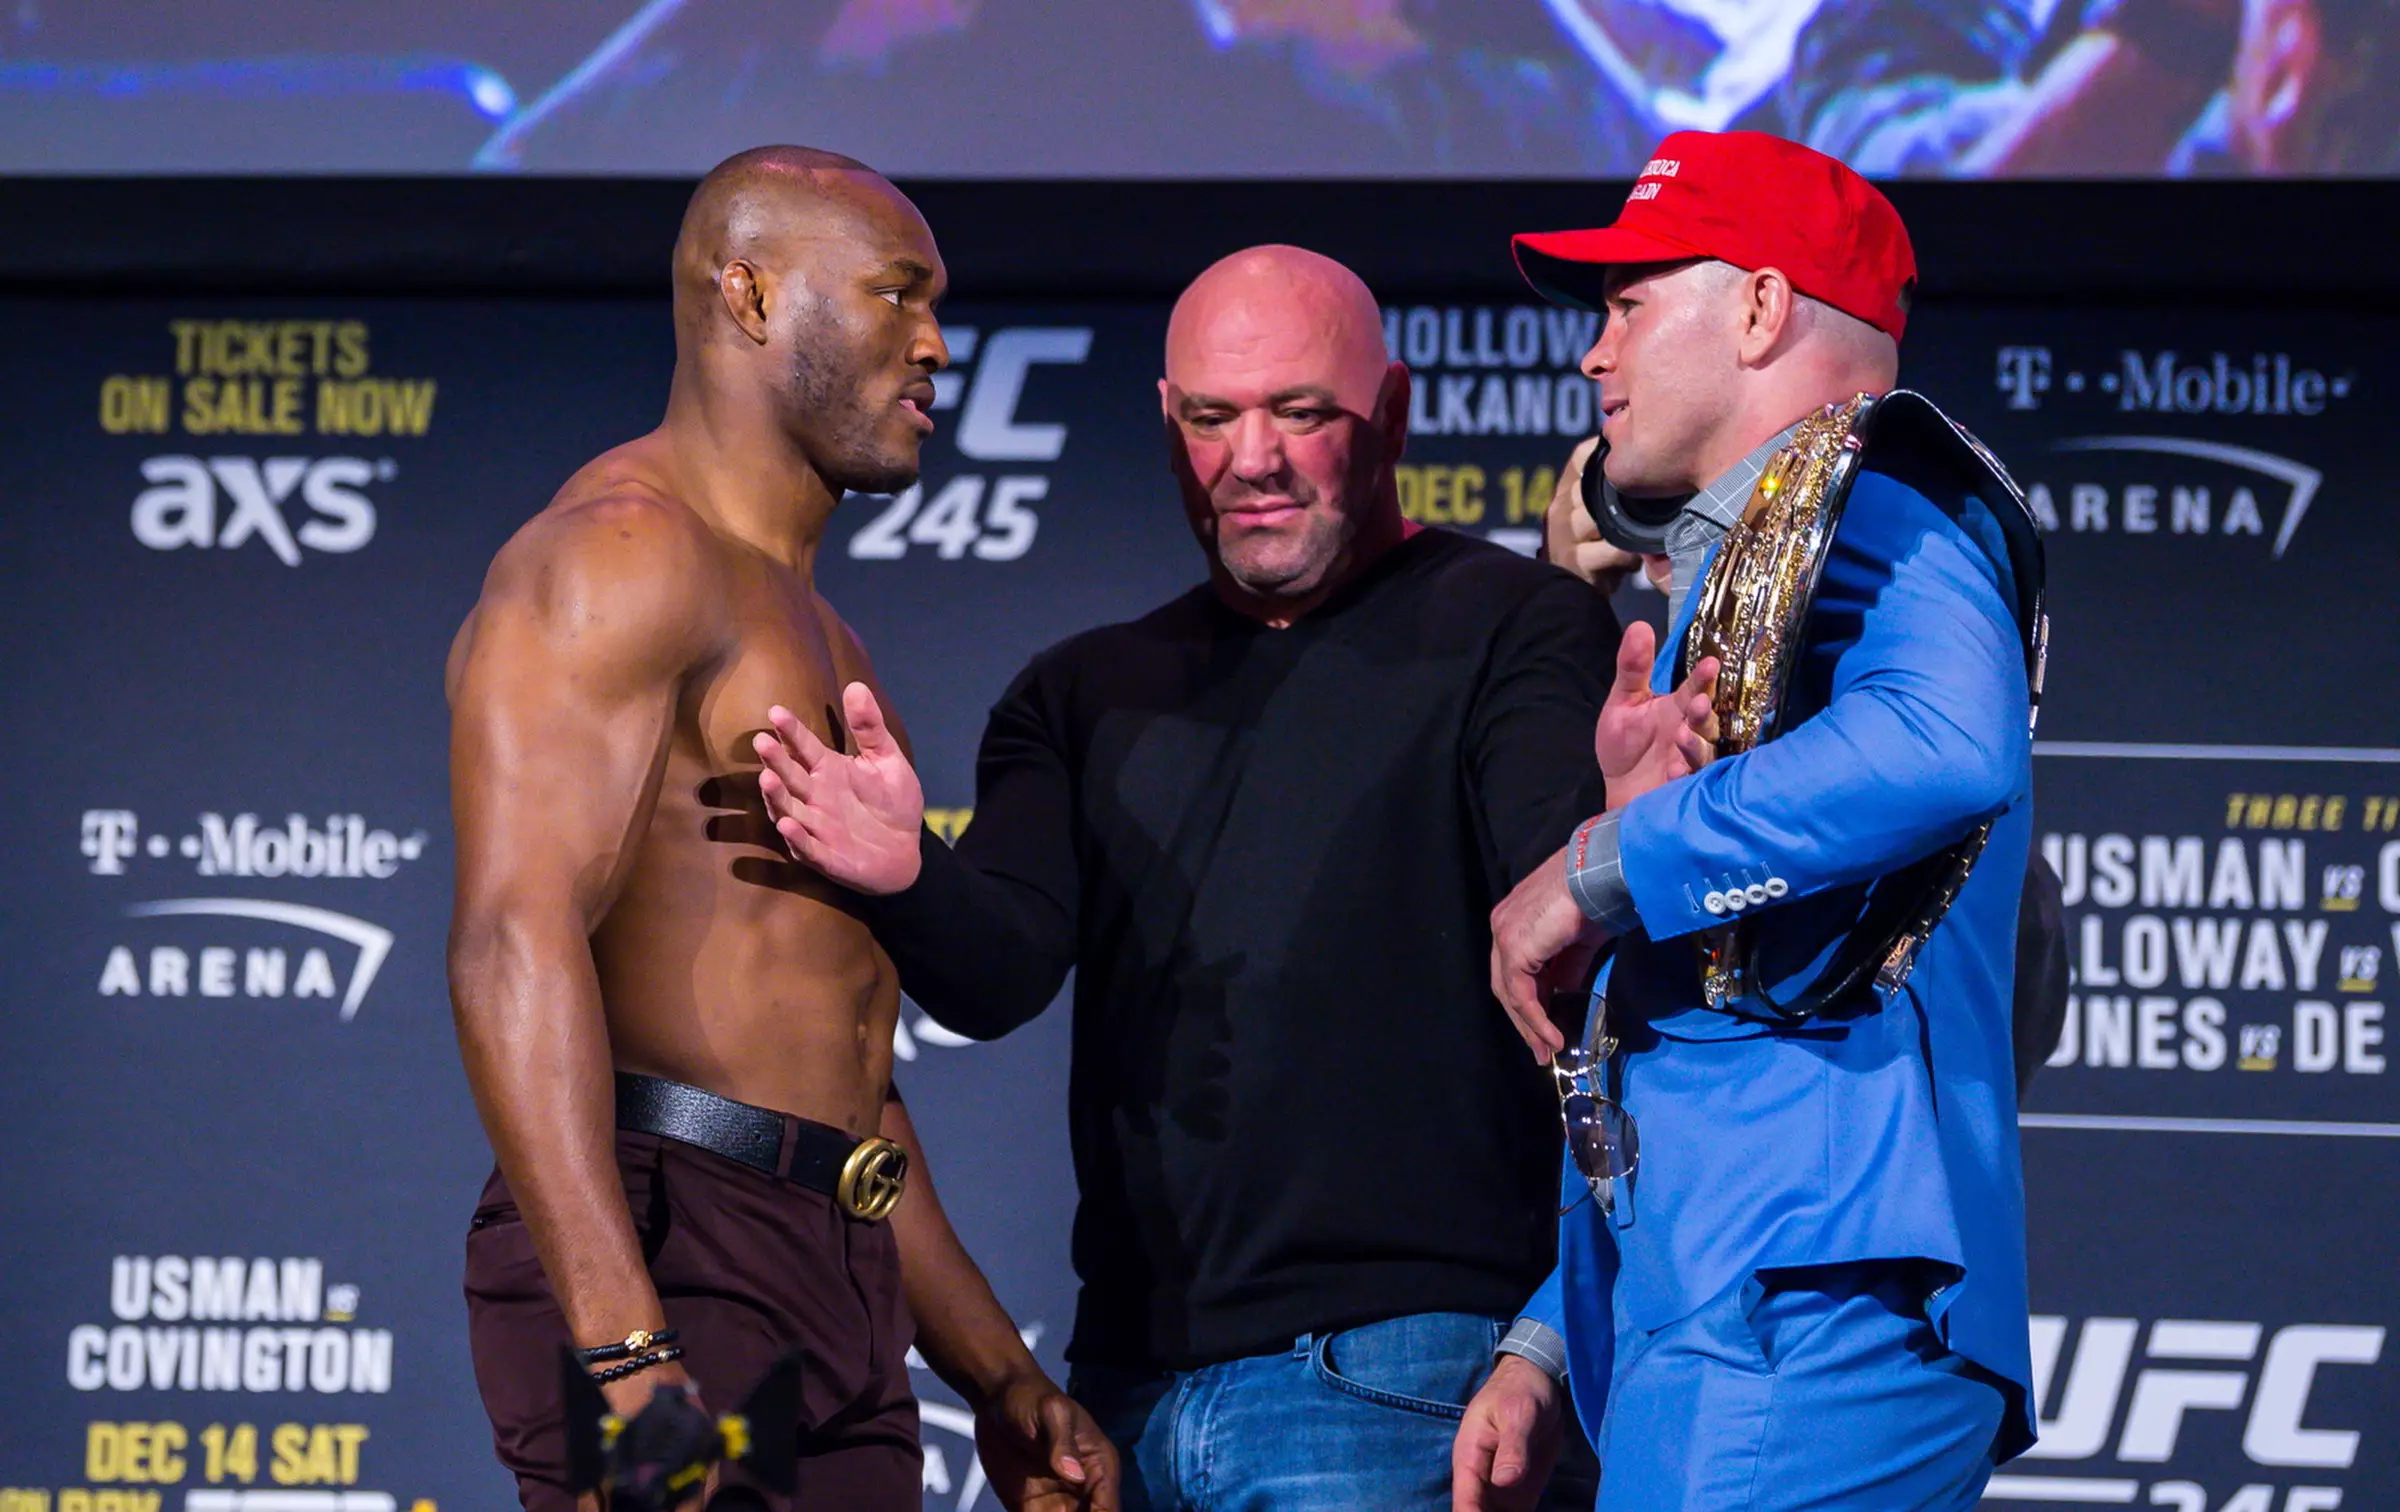 The welterweight title fight could be explosive. Image: PA Images